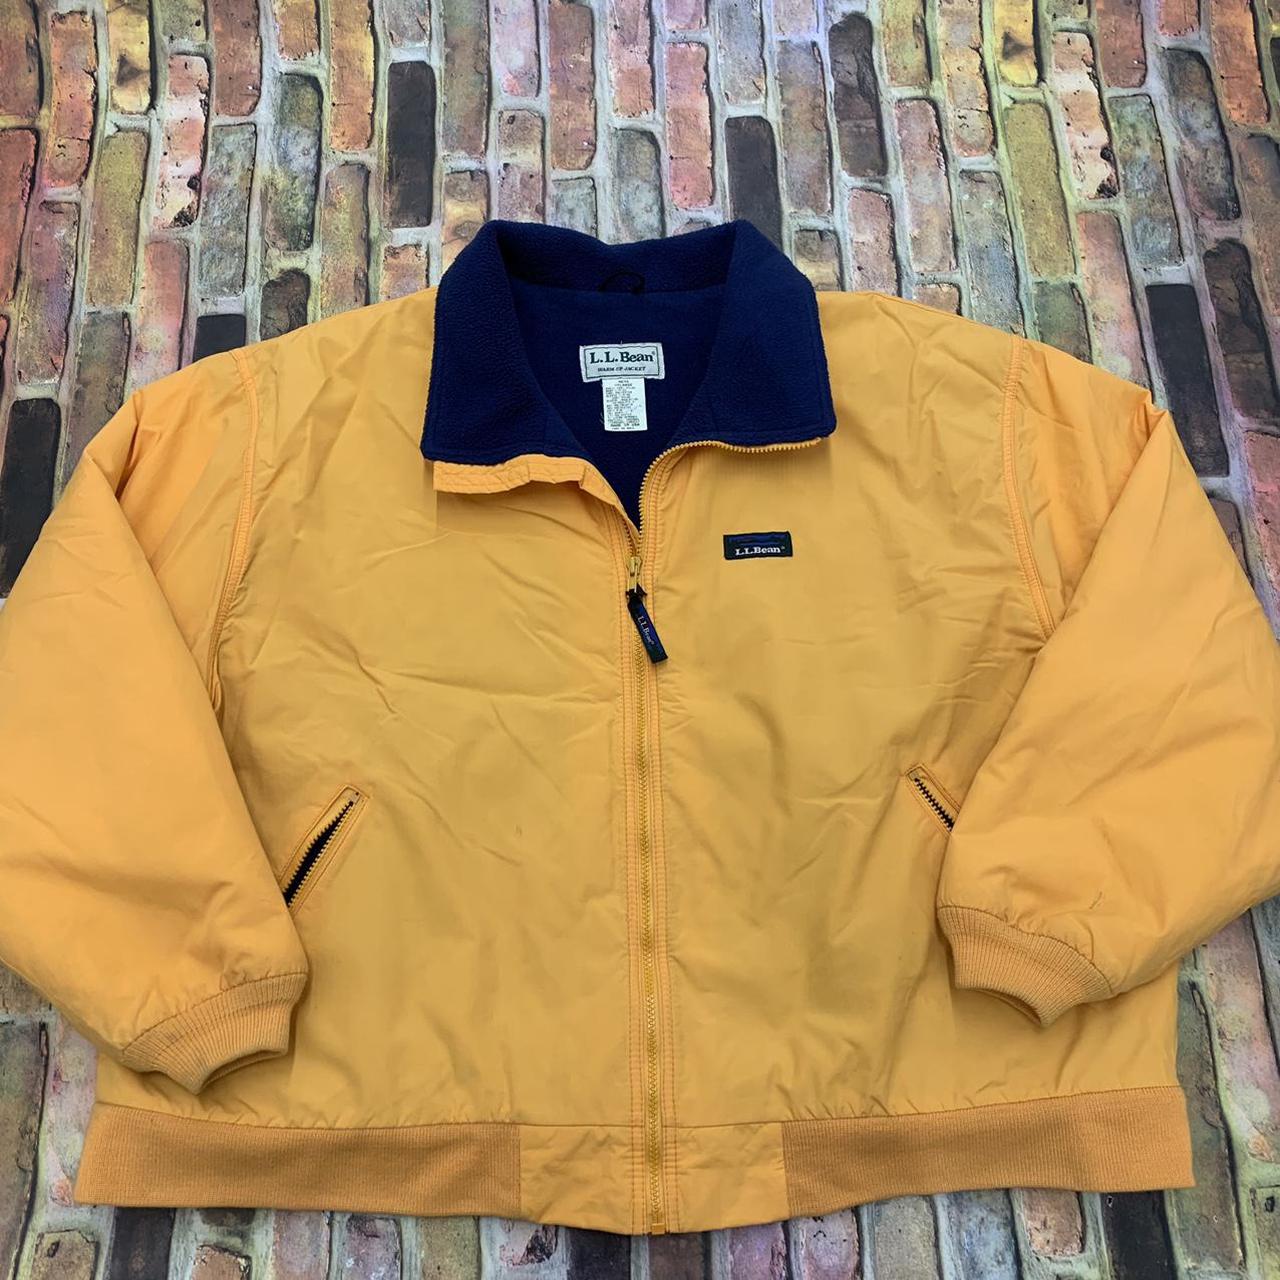 Vintage L.L. Bean Warm-Up Jacket in yellow. From the - Depop